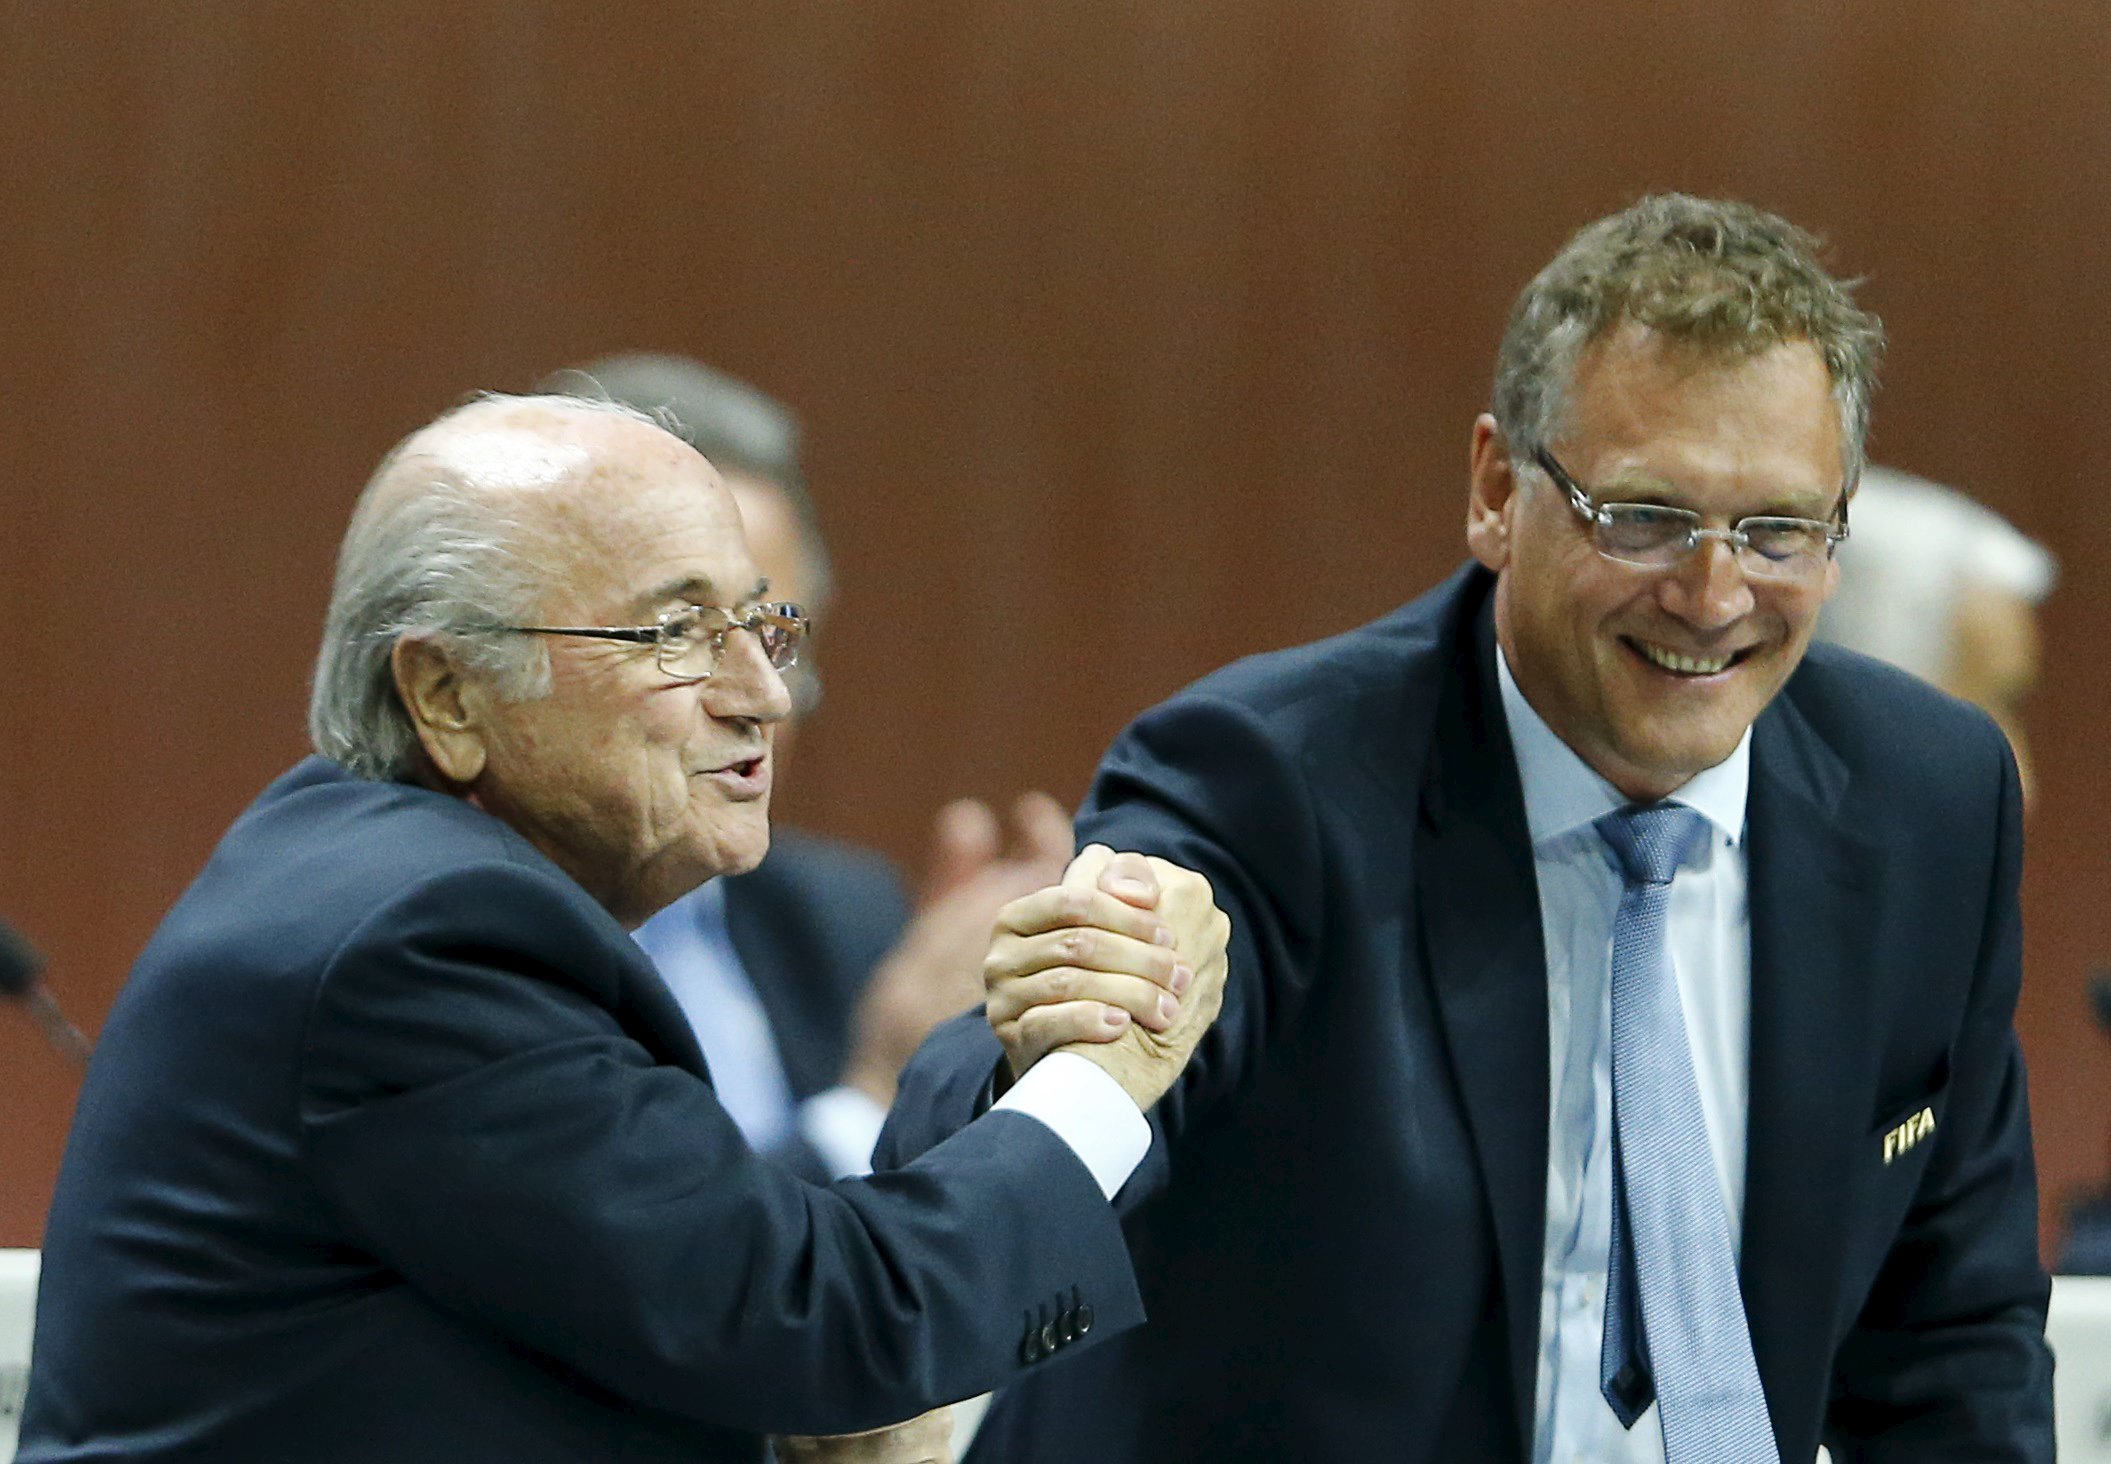 FIFA scandal deepens as Blatter aide linked to payments